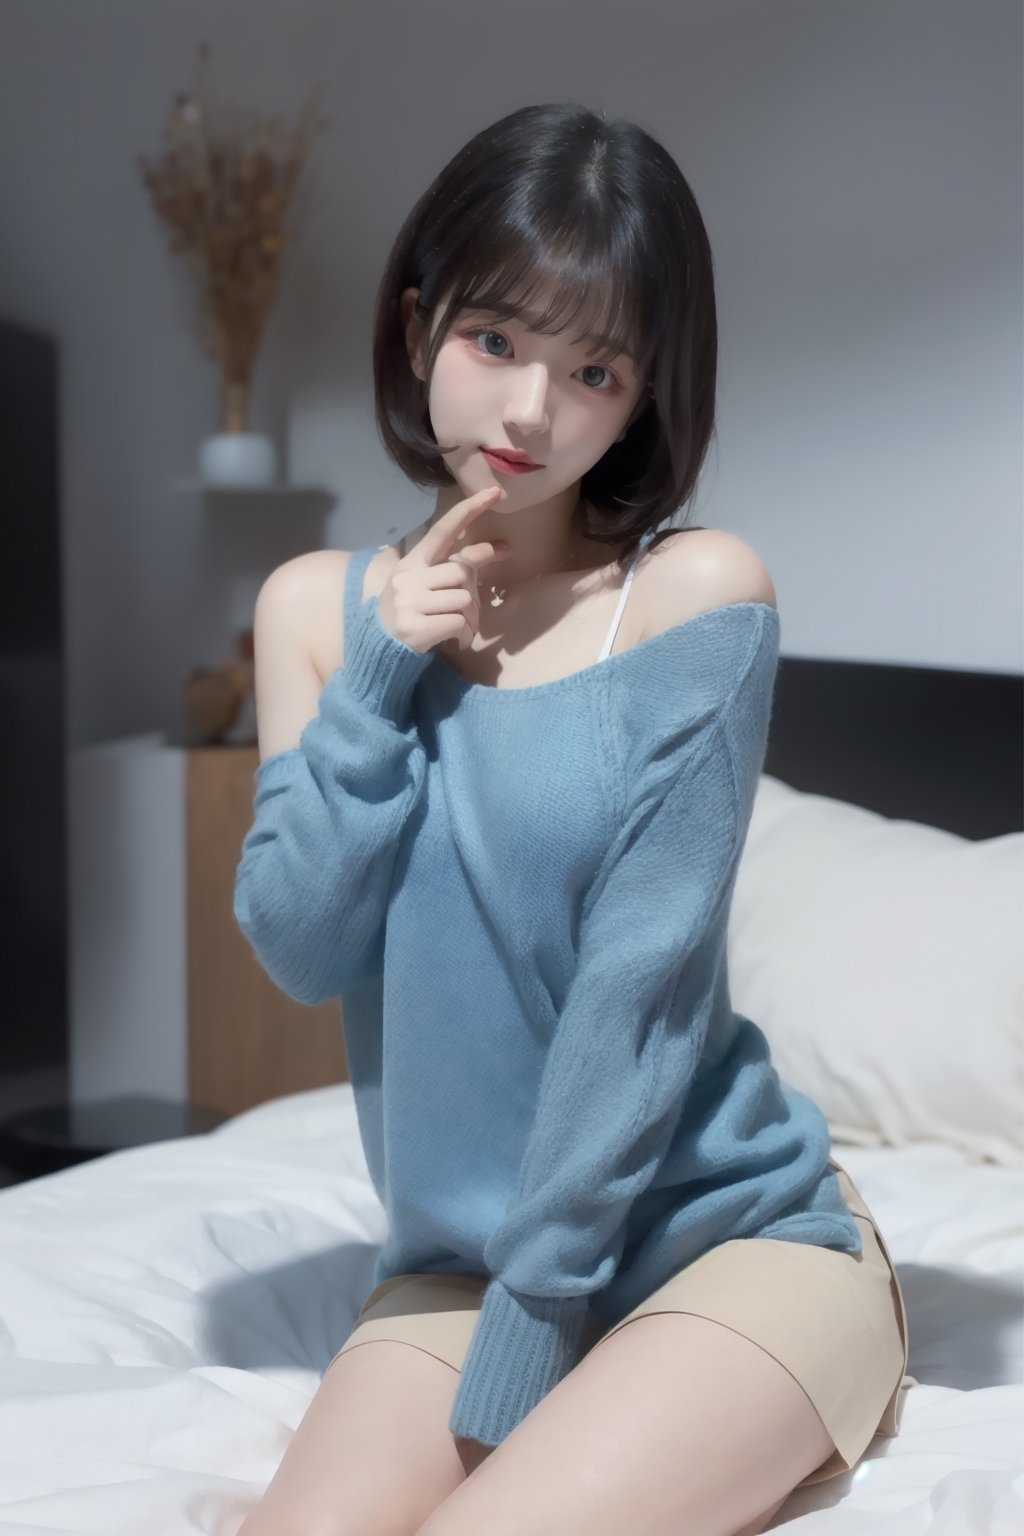 8k 3d  Reality, (best quality), (masterpiece), (korean pretty girl), a girl lying in bed, making humorous gestures, real face, a natural facial expression, clean and white skin, see blue eyes, a small natural finger, thin, small, and pretty hands, open shoulder Sweater shirt, micro short Skirt, tied short brown hair, Reality 3d background, ,zzenny_n,1 girl,hold_up_legs,nightgown